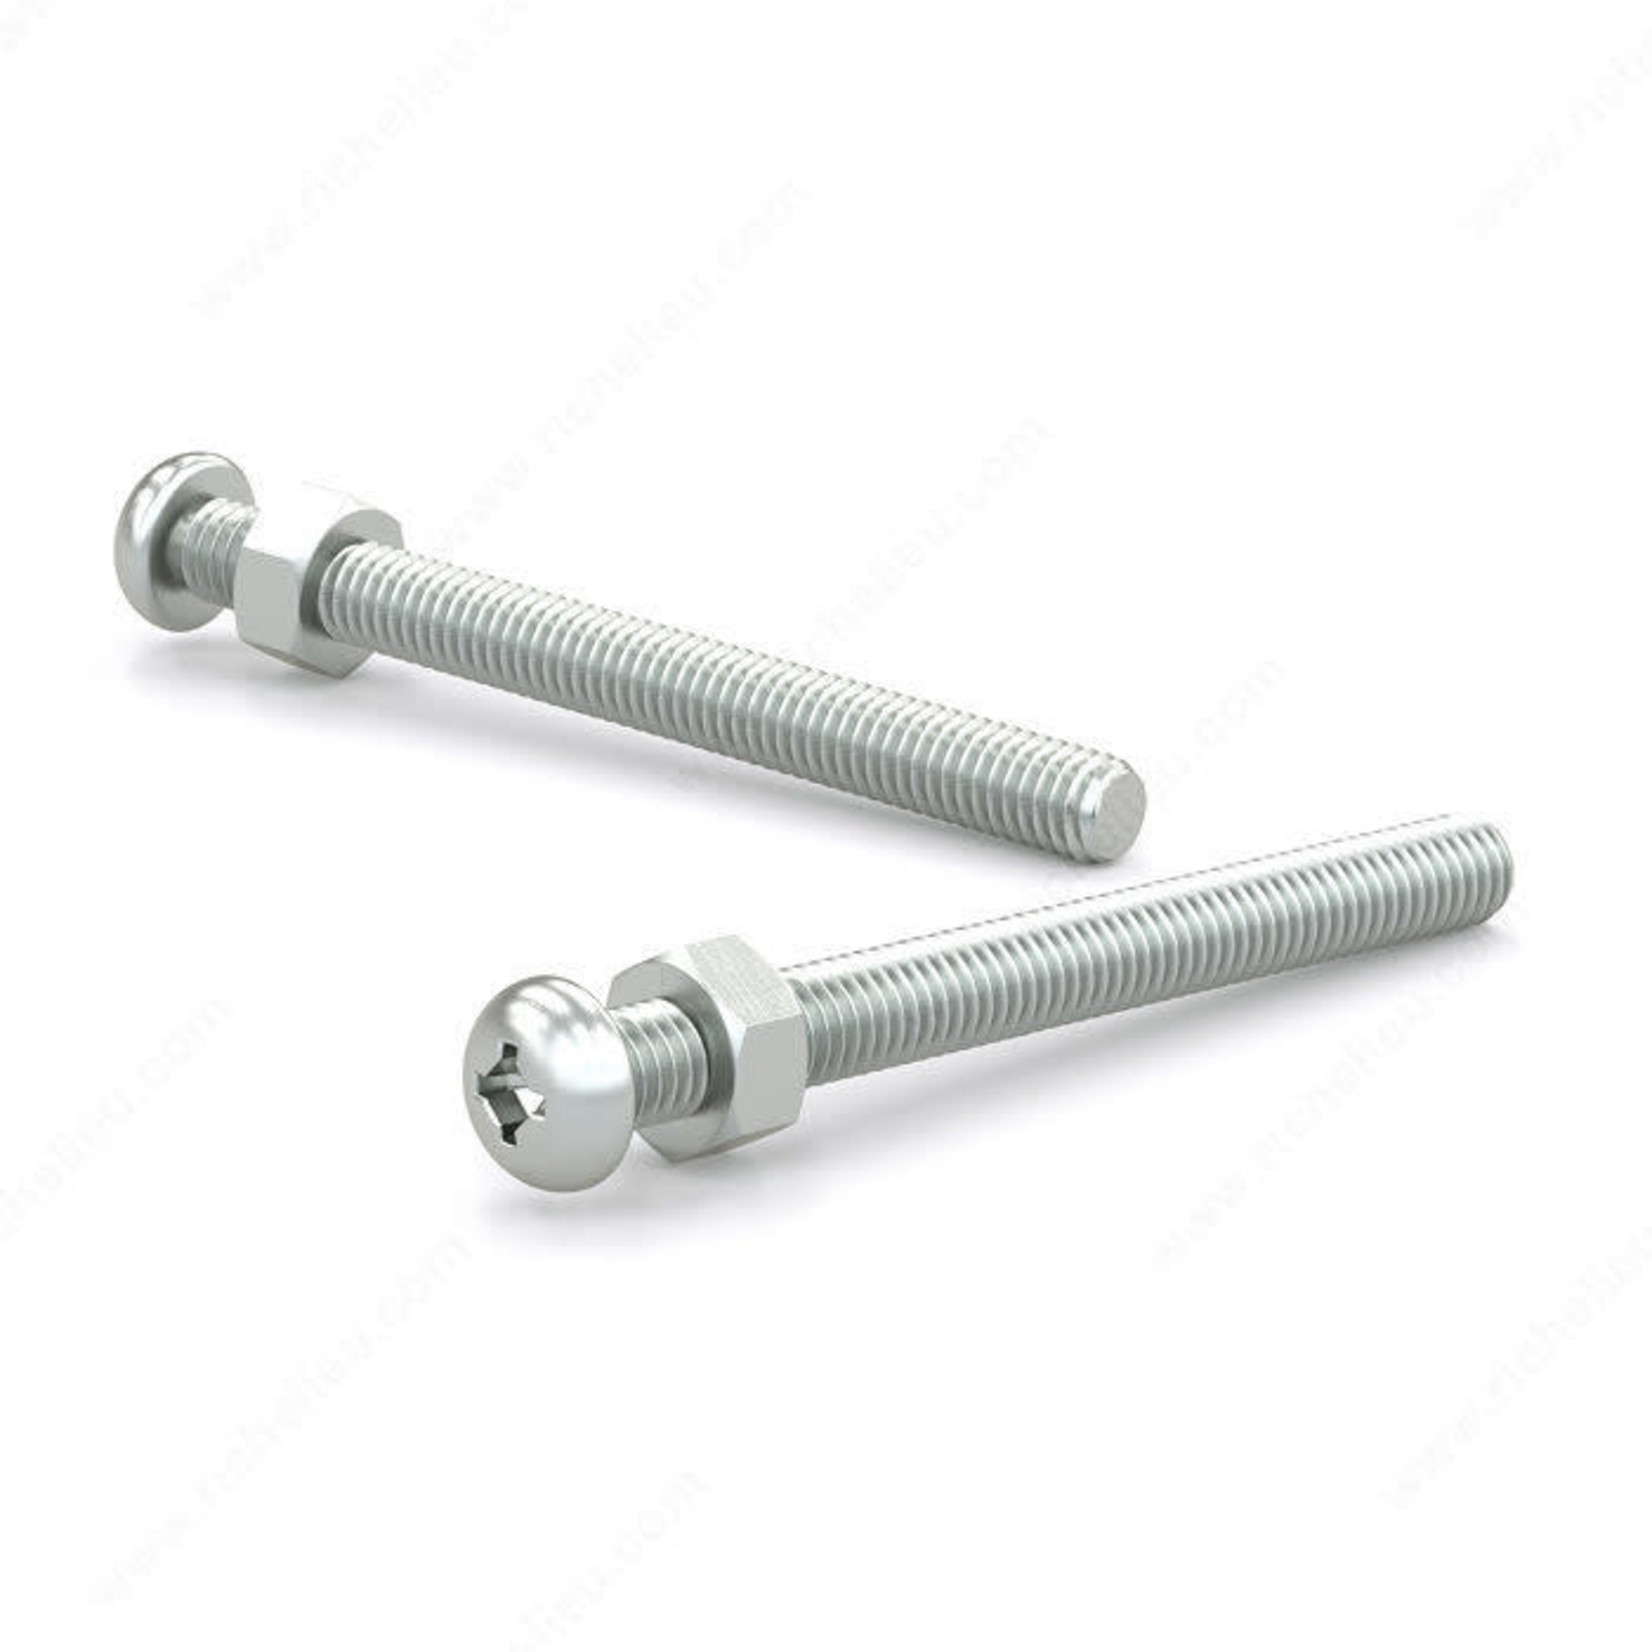 RELIABLE MACHINE SCREW WITH NUT, PAN HEAD, 10-32 1-1/2IN, 8PK BLISTER